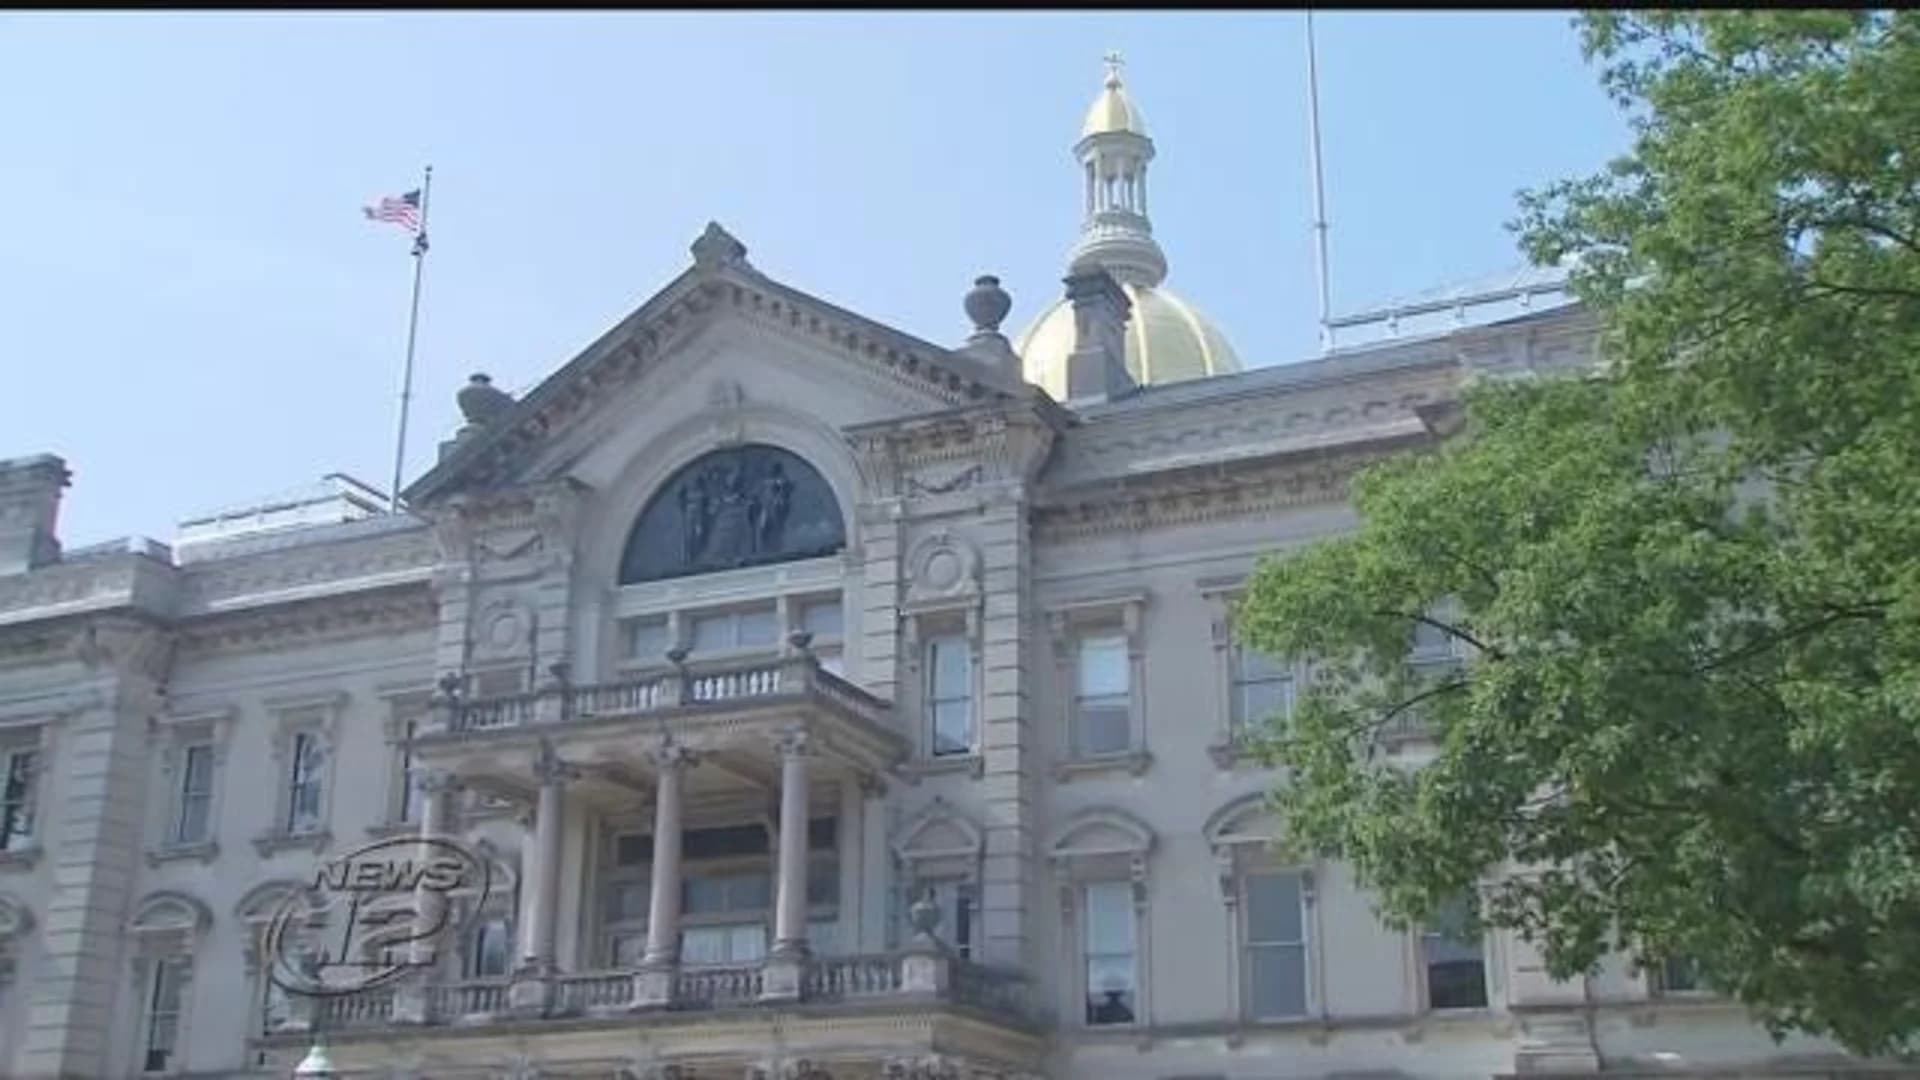 KIYC: Nearly 40 percent of NJ lawmakers were appointed to office